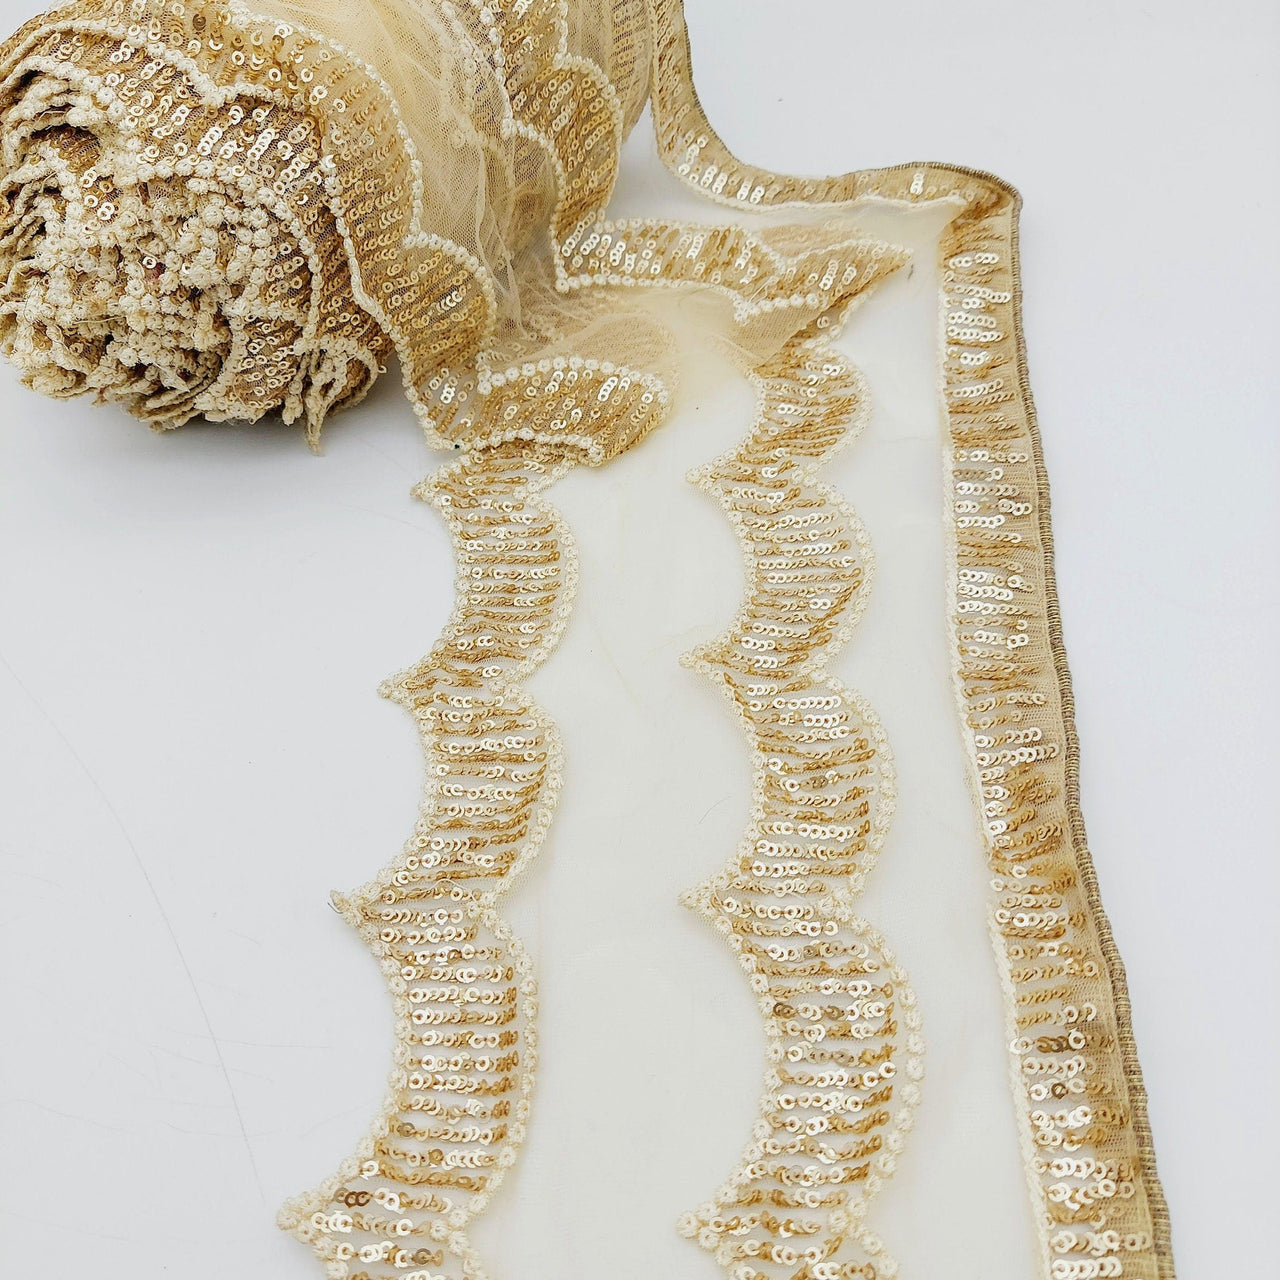 Beige Net Scallop Lace Trim with Gold Sequins, Sari Border, Embroidered Trim